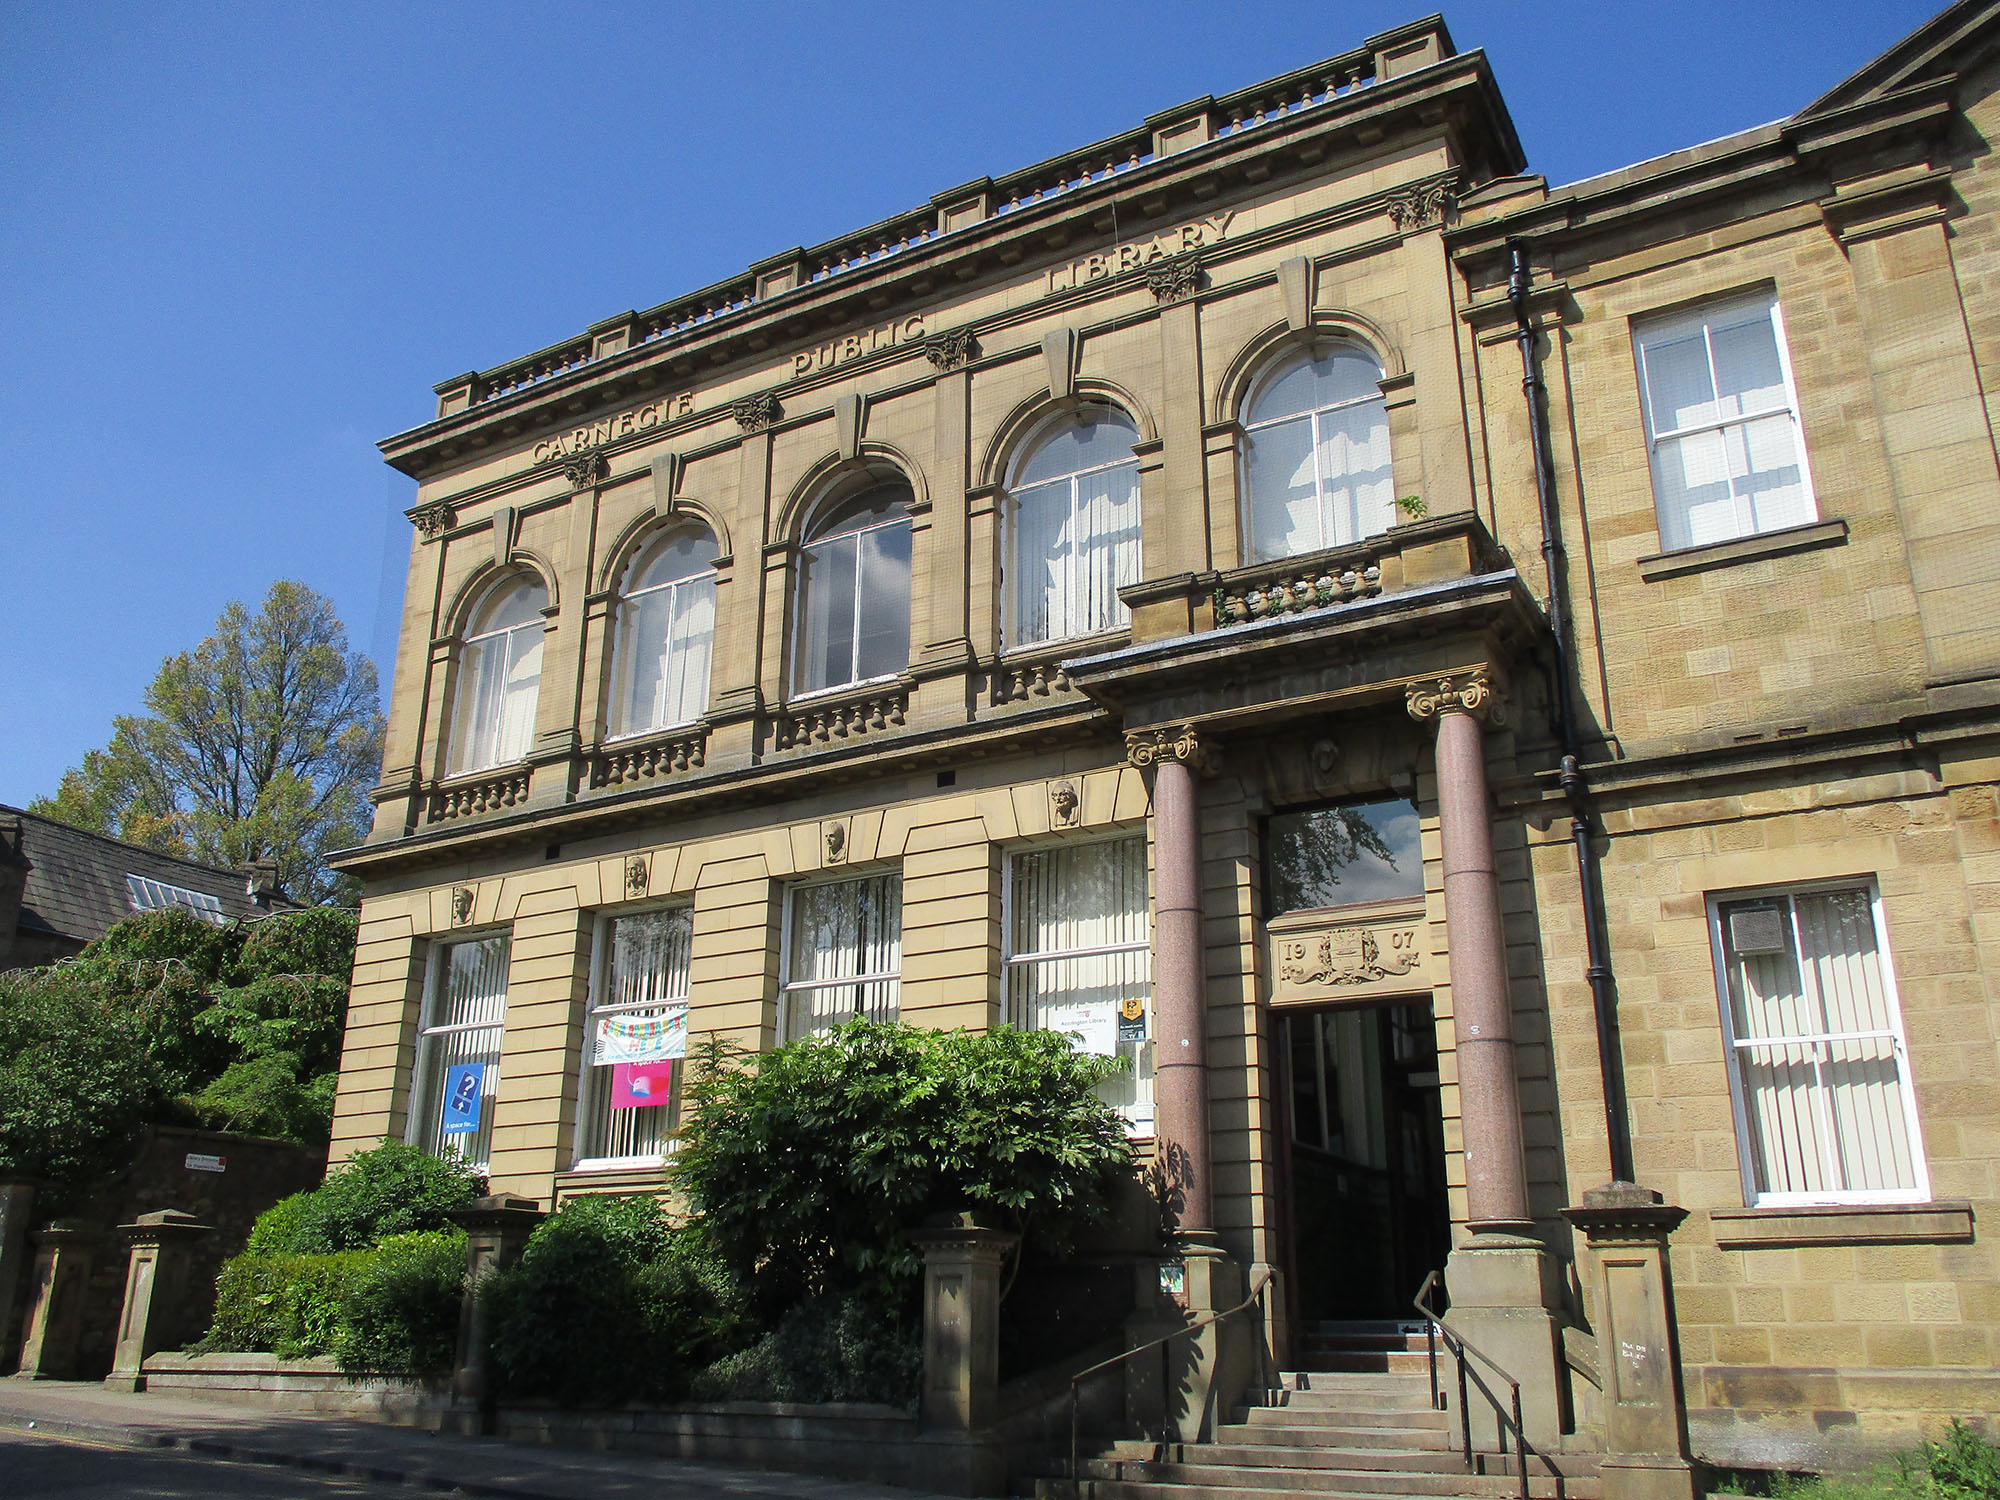 2.-ACCRINGTON-LIBRARY-FUNDED-BY-ANDREW-CARNEGIE-AND-OPENED-IN-1908.-PHOTO-CREDIT-LANCASHIRE-COUNTY-LIBRARIES